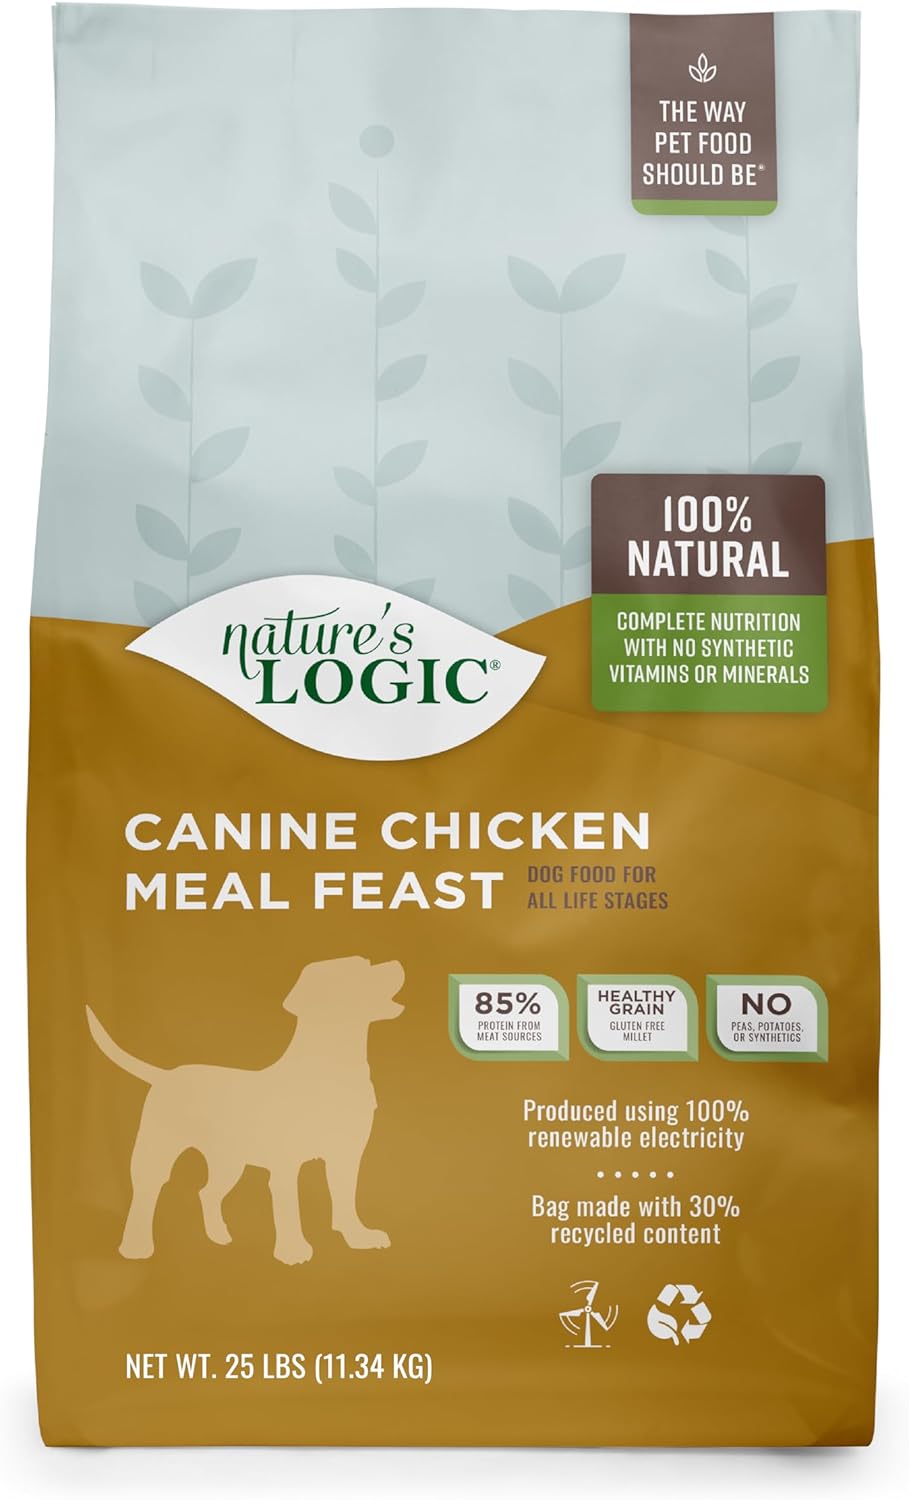 Nature’s Logic Canine Chicken Meal Feast Dry Dog Food – Gallery Image 1